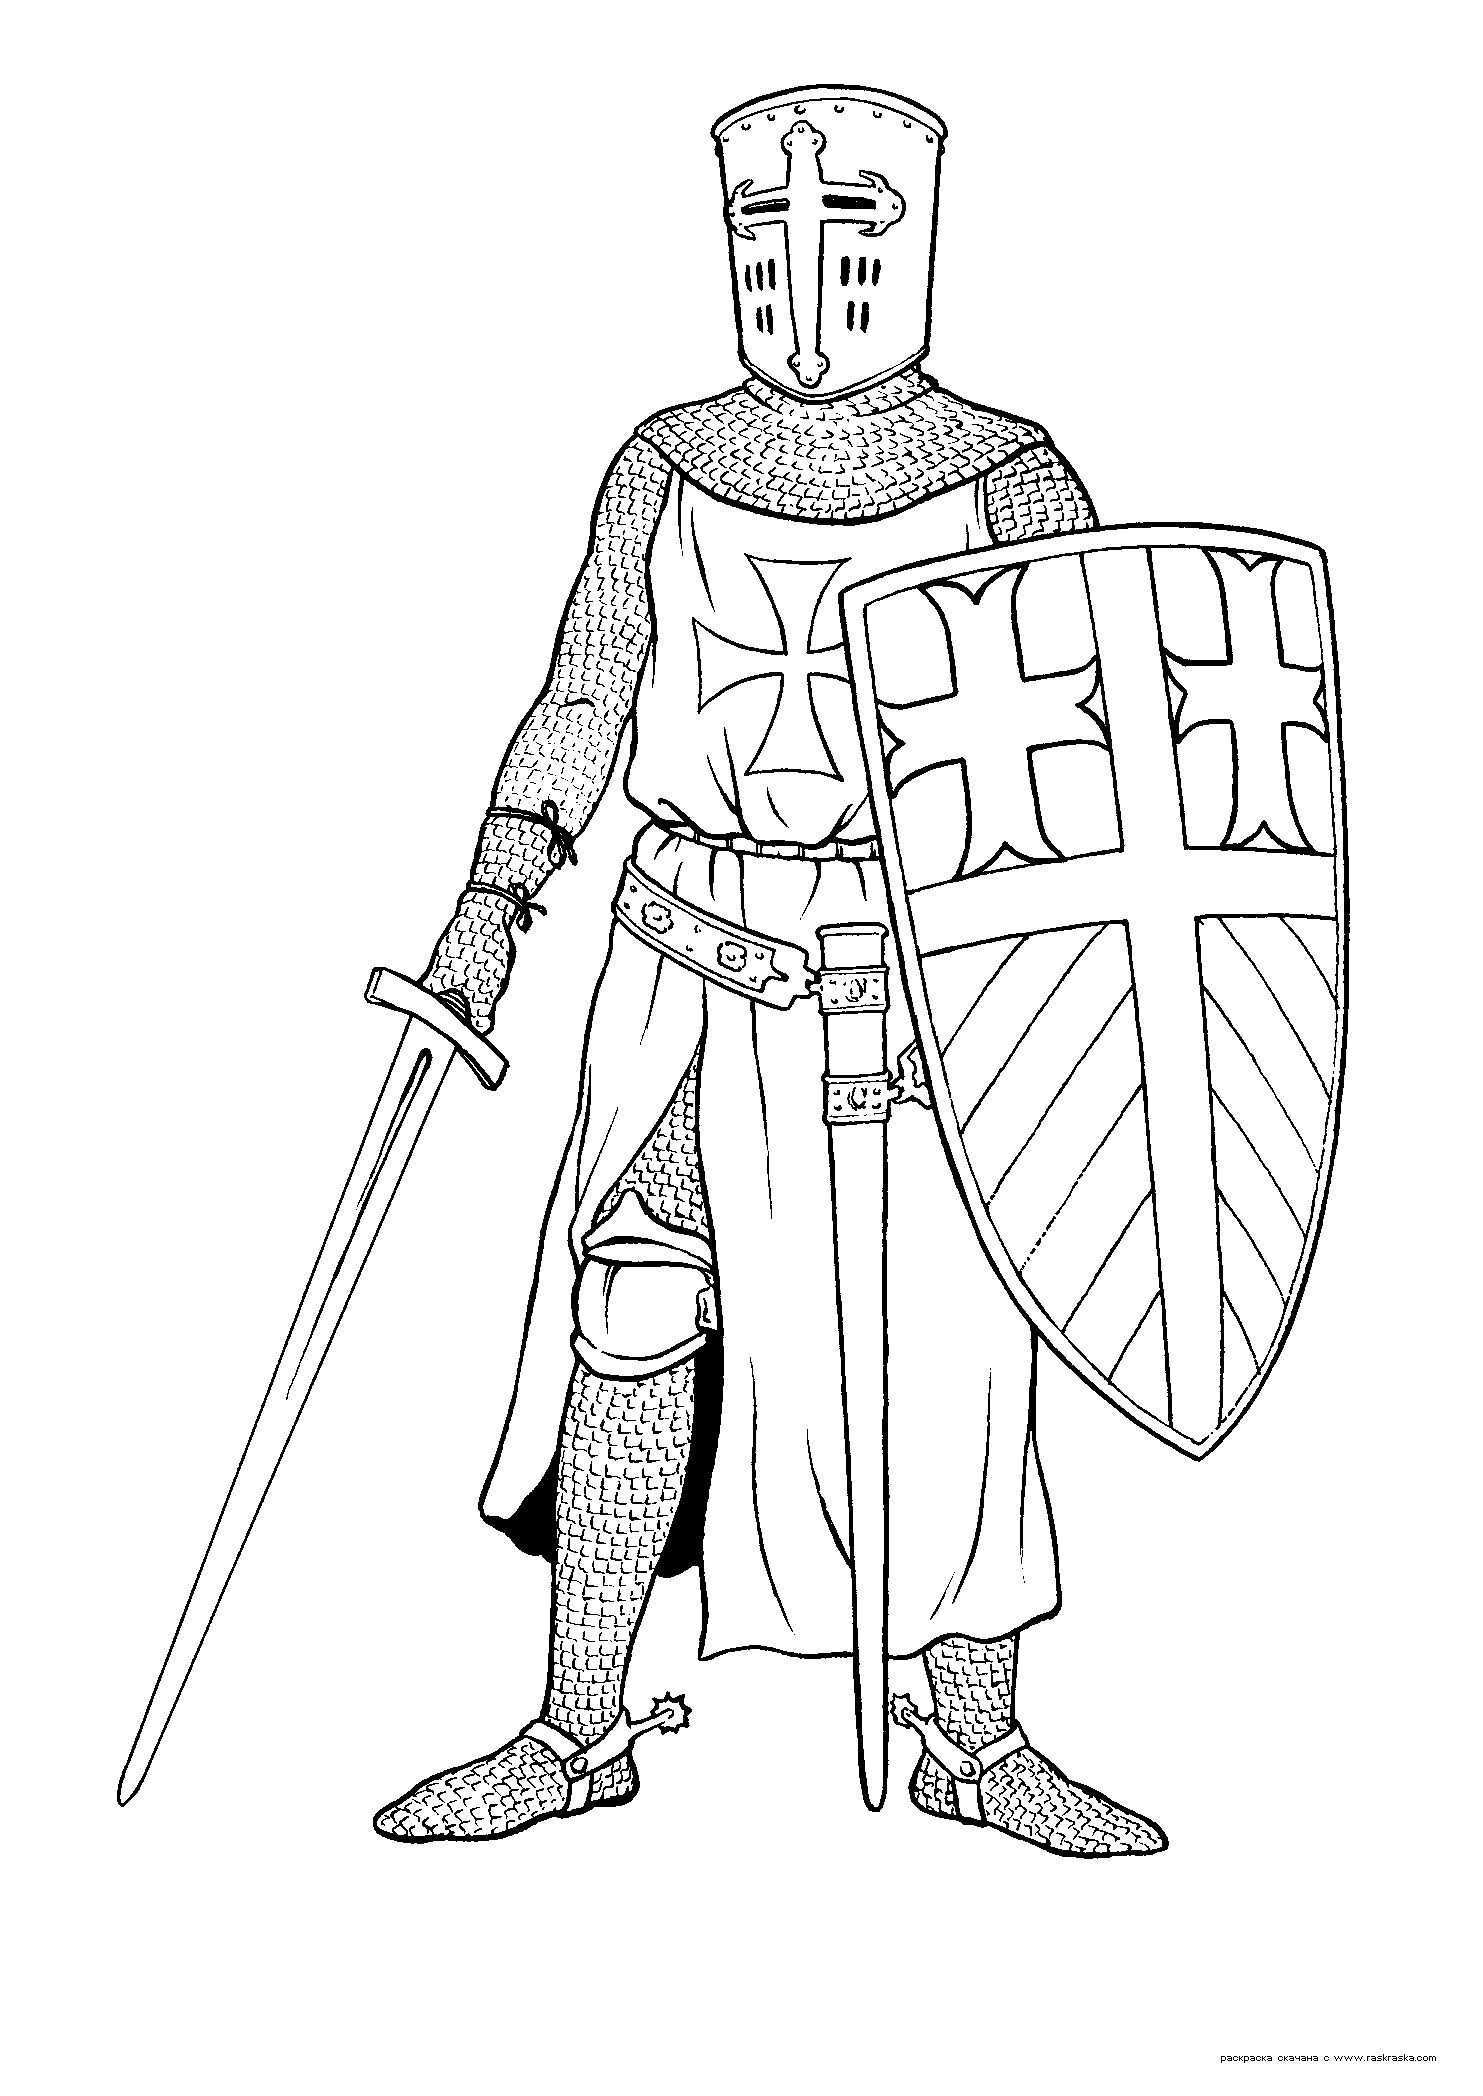 Rycar Krestonosec Castle Coloring Page Medieval Drawings Coloring Pages